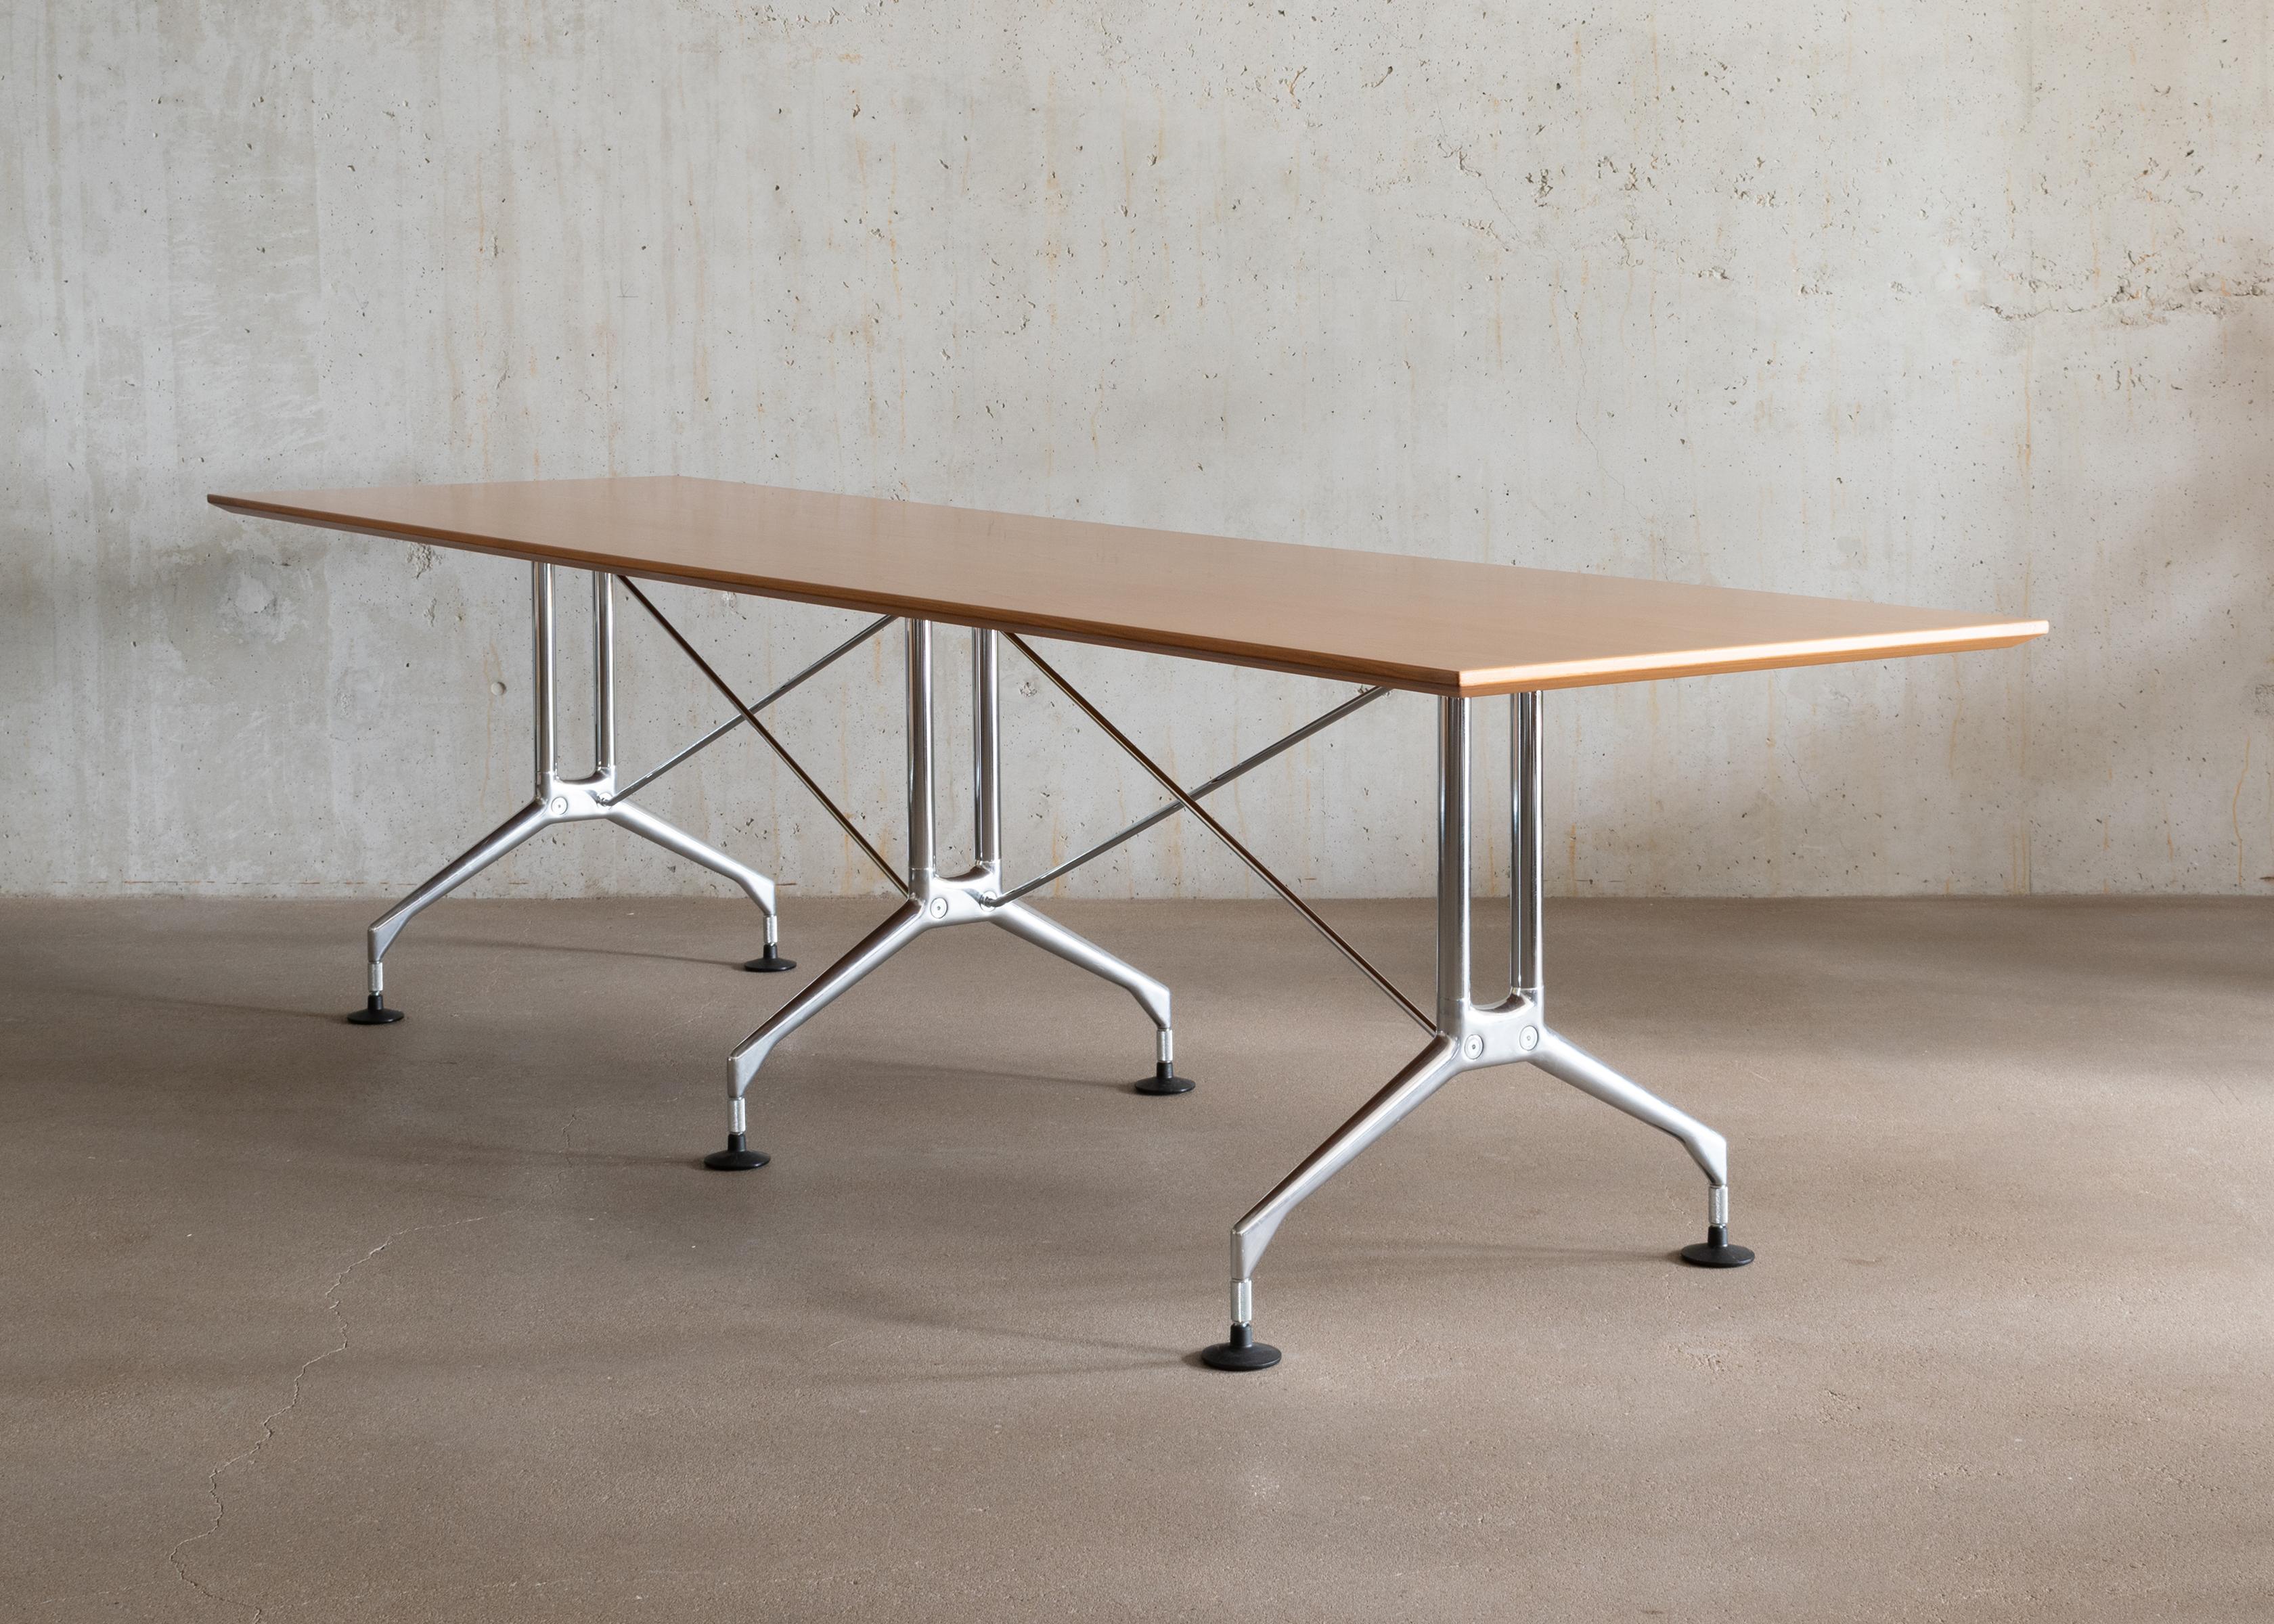 Antonio Citterio Spatio Table in Oak Veneer and Chrome Plated Steel for Vitra 6